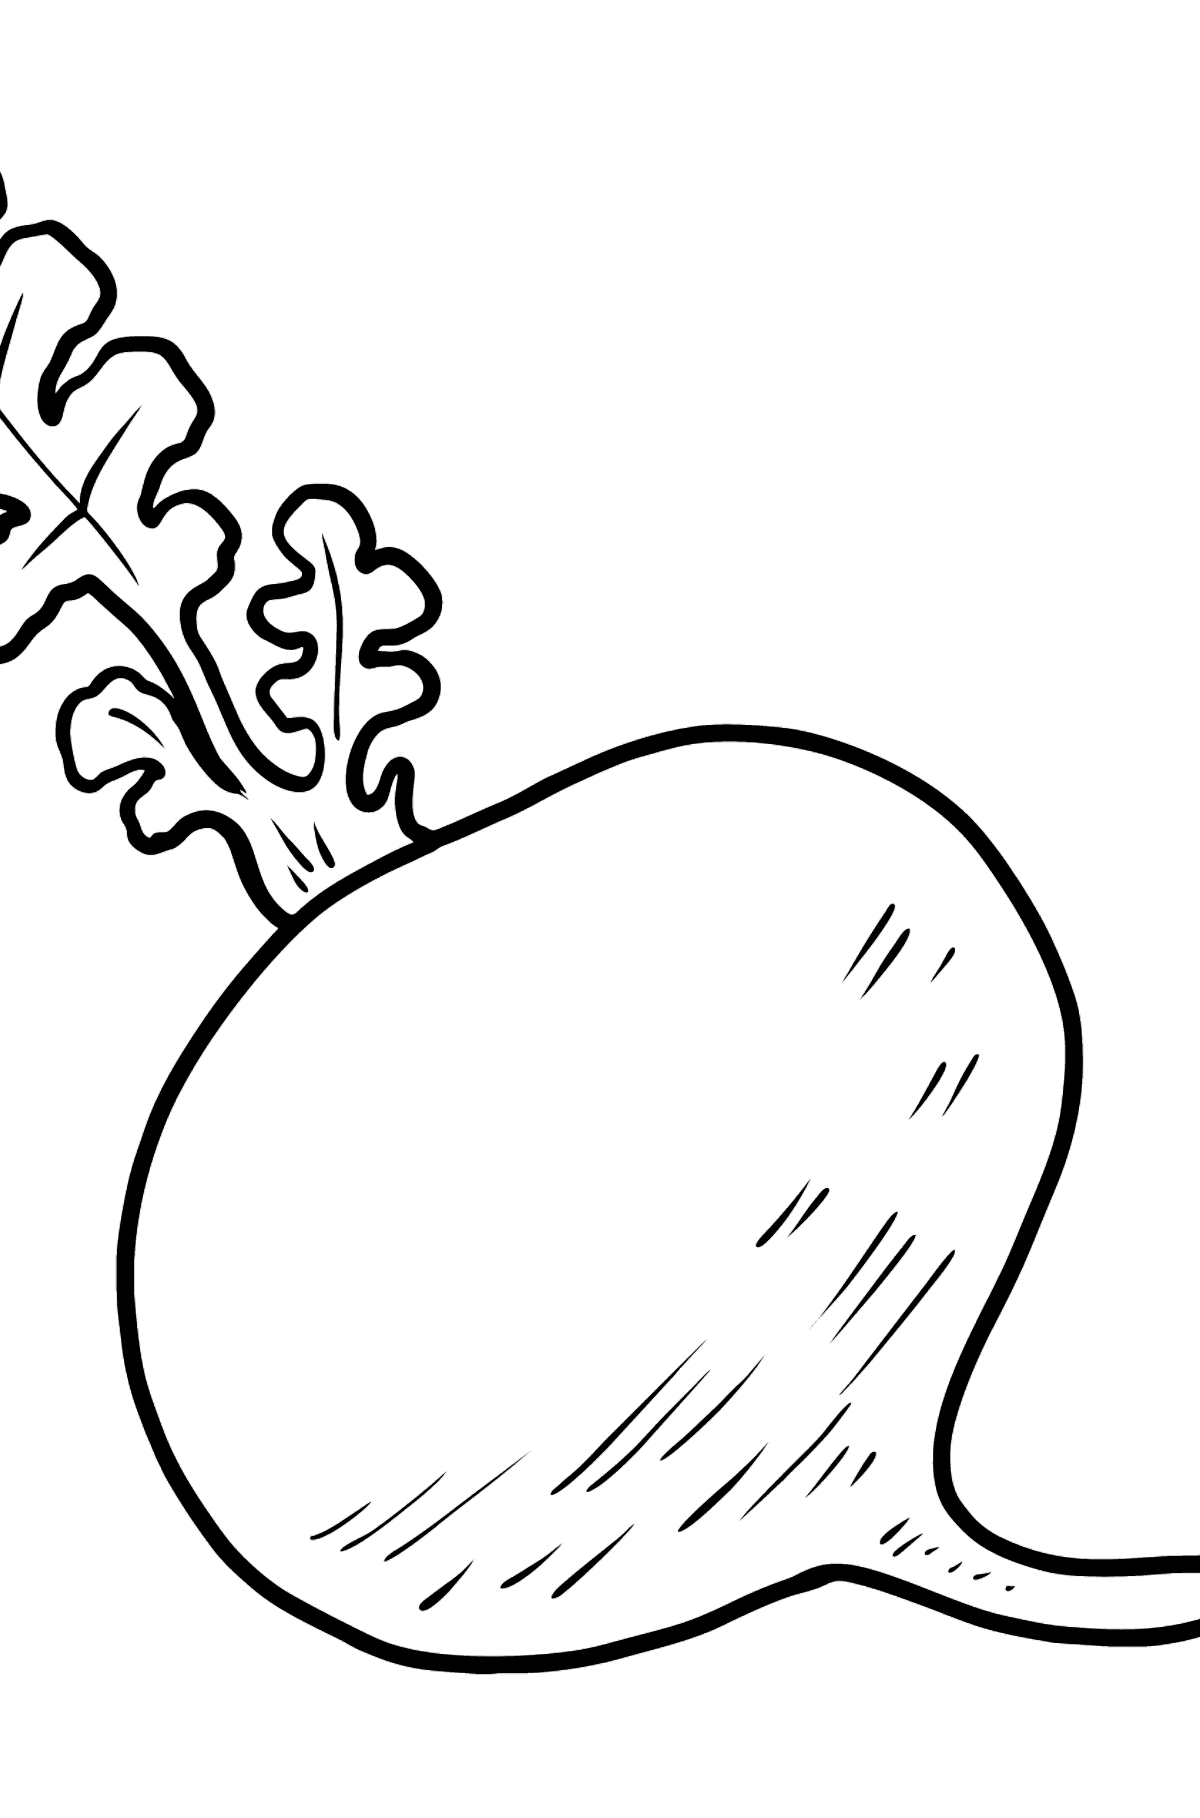 Black Radish coloring page - Coloring Pages for Kids